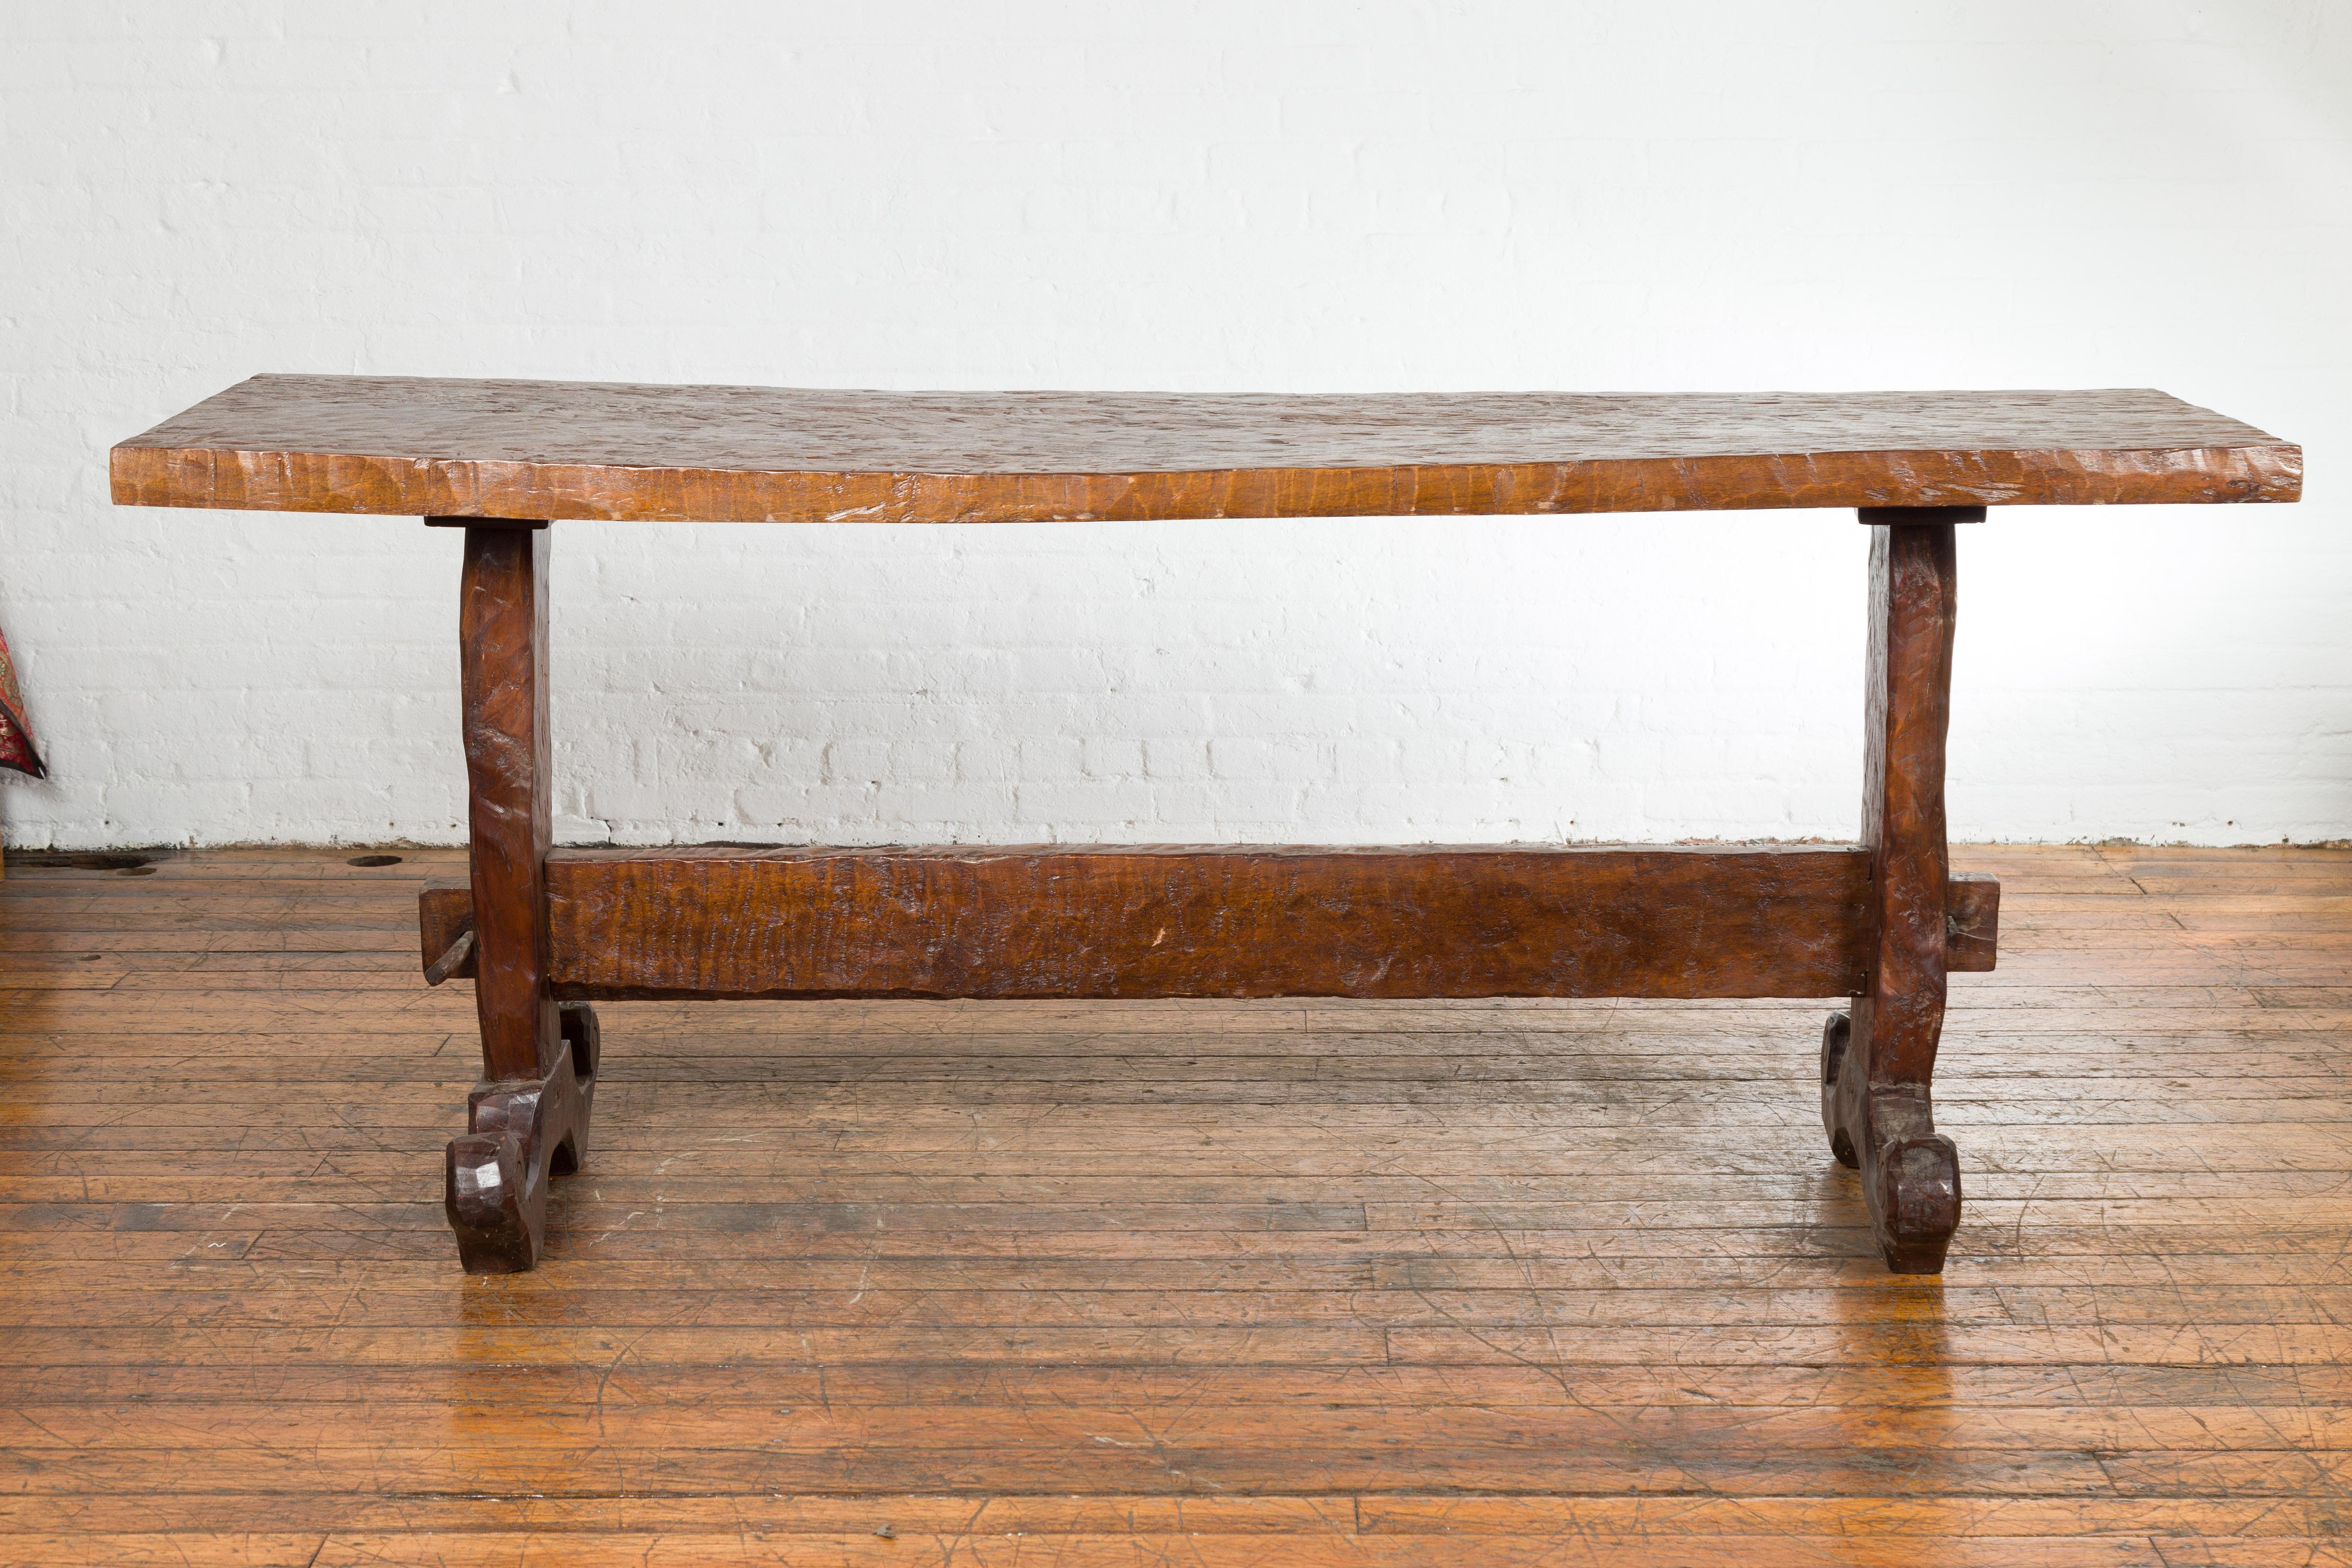 An antique Javanese rustic console table from the 19th century with uneven rectangular top and trestle base. Indulge in the charm of rustic Indonesian design with this 19th-century Javanese console table. This antique piece showcases a trestle base,